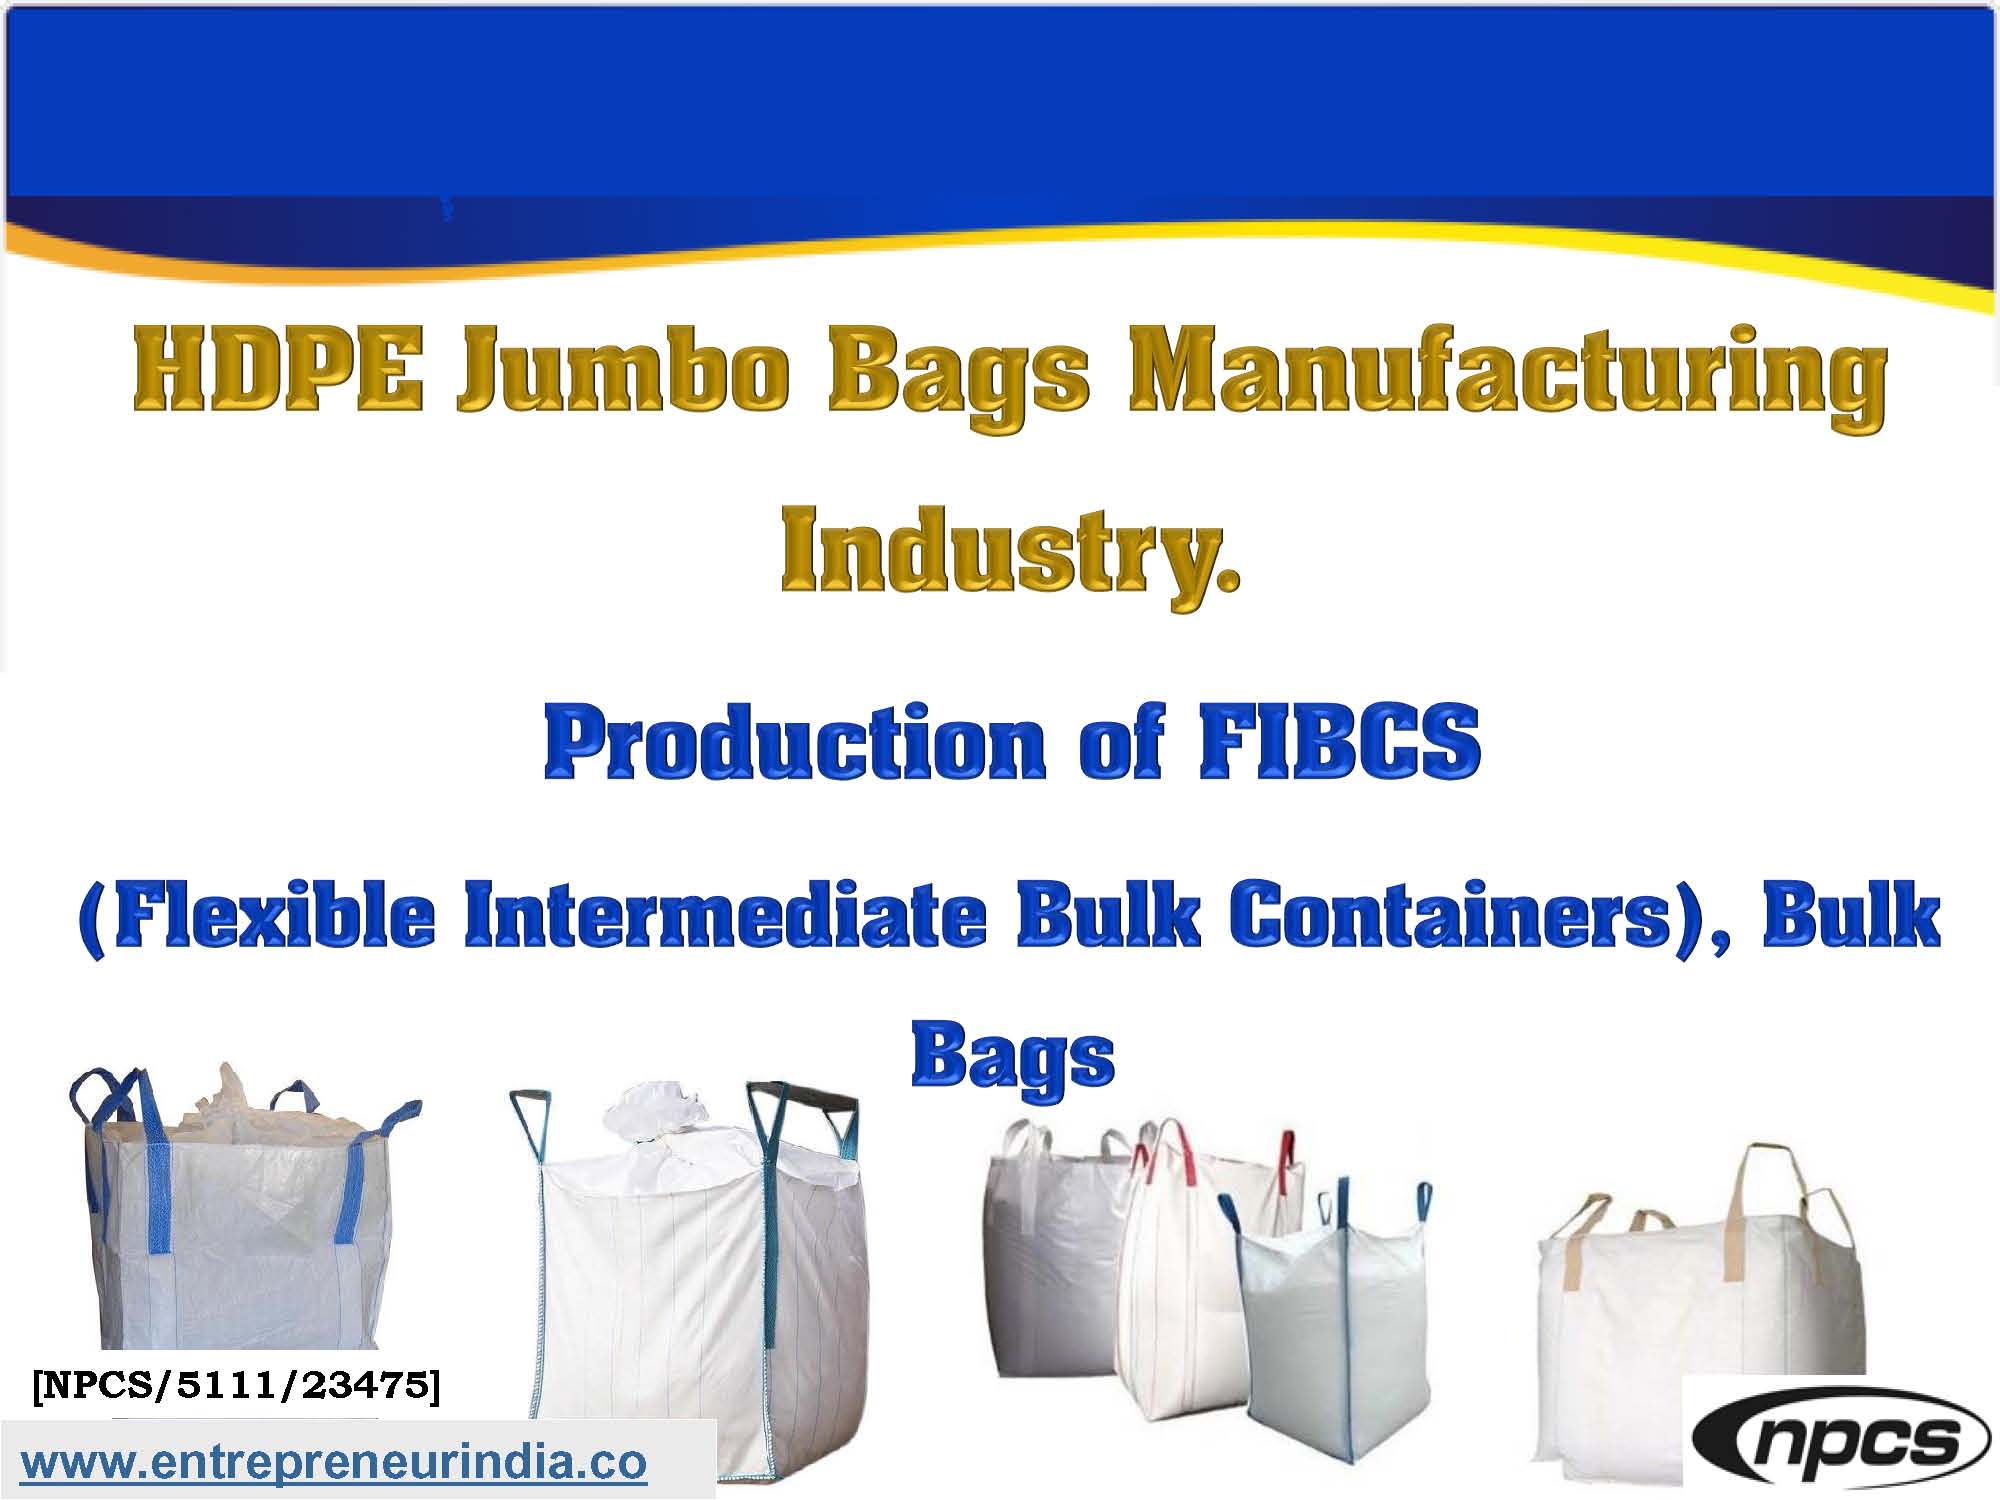 HDPE Jumbo Bags Manufacturing Industry